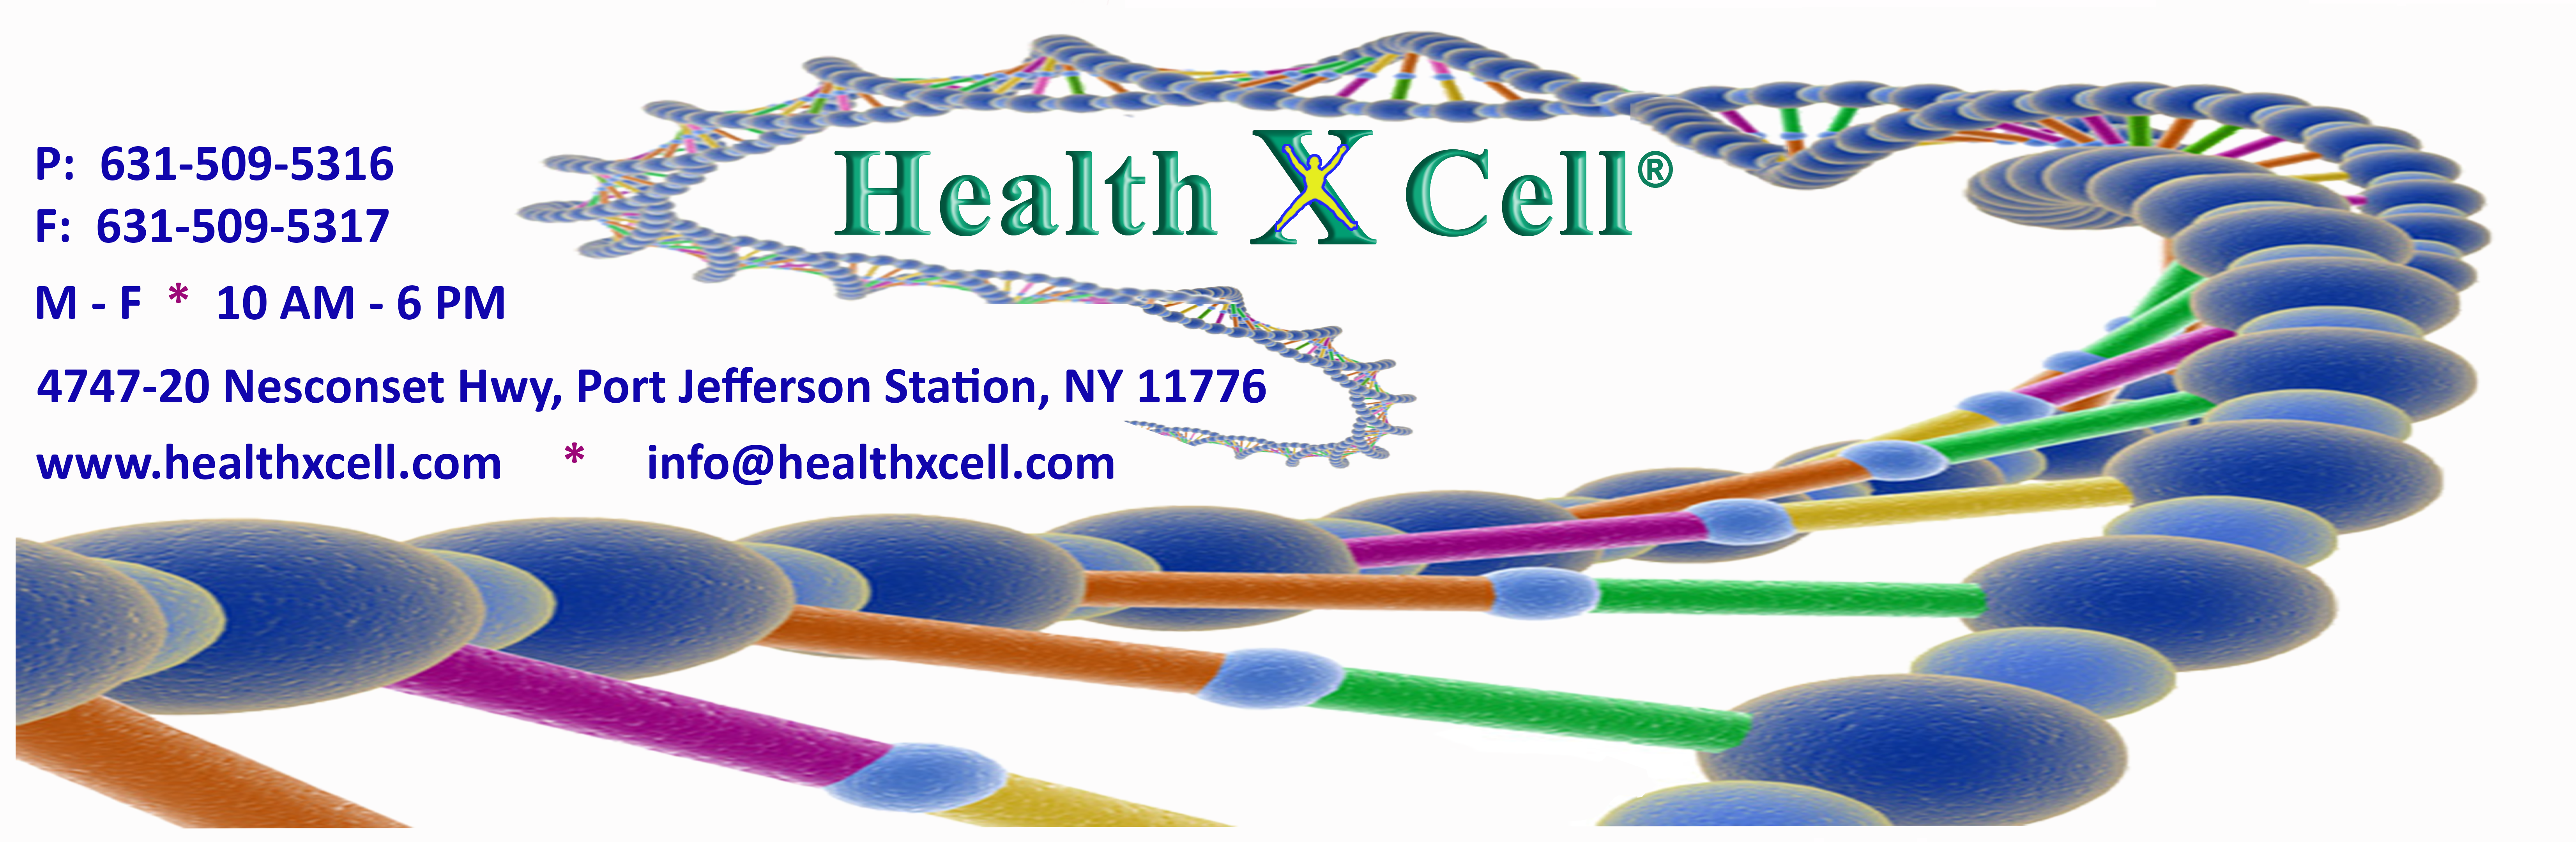 HealthXCell